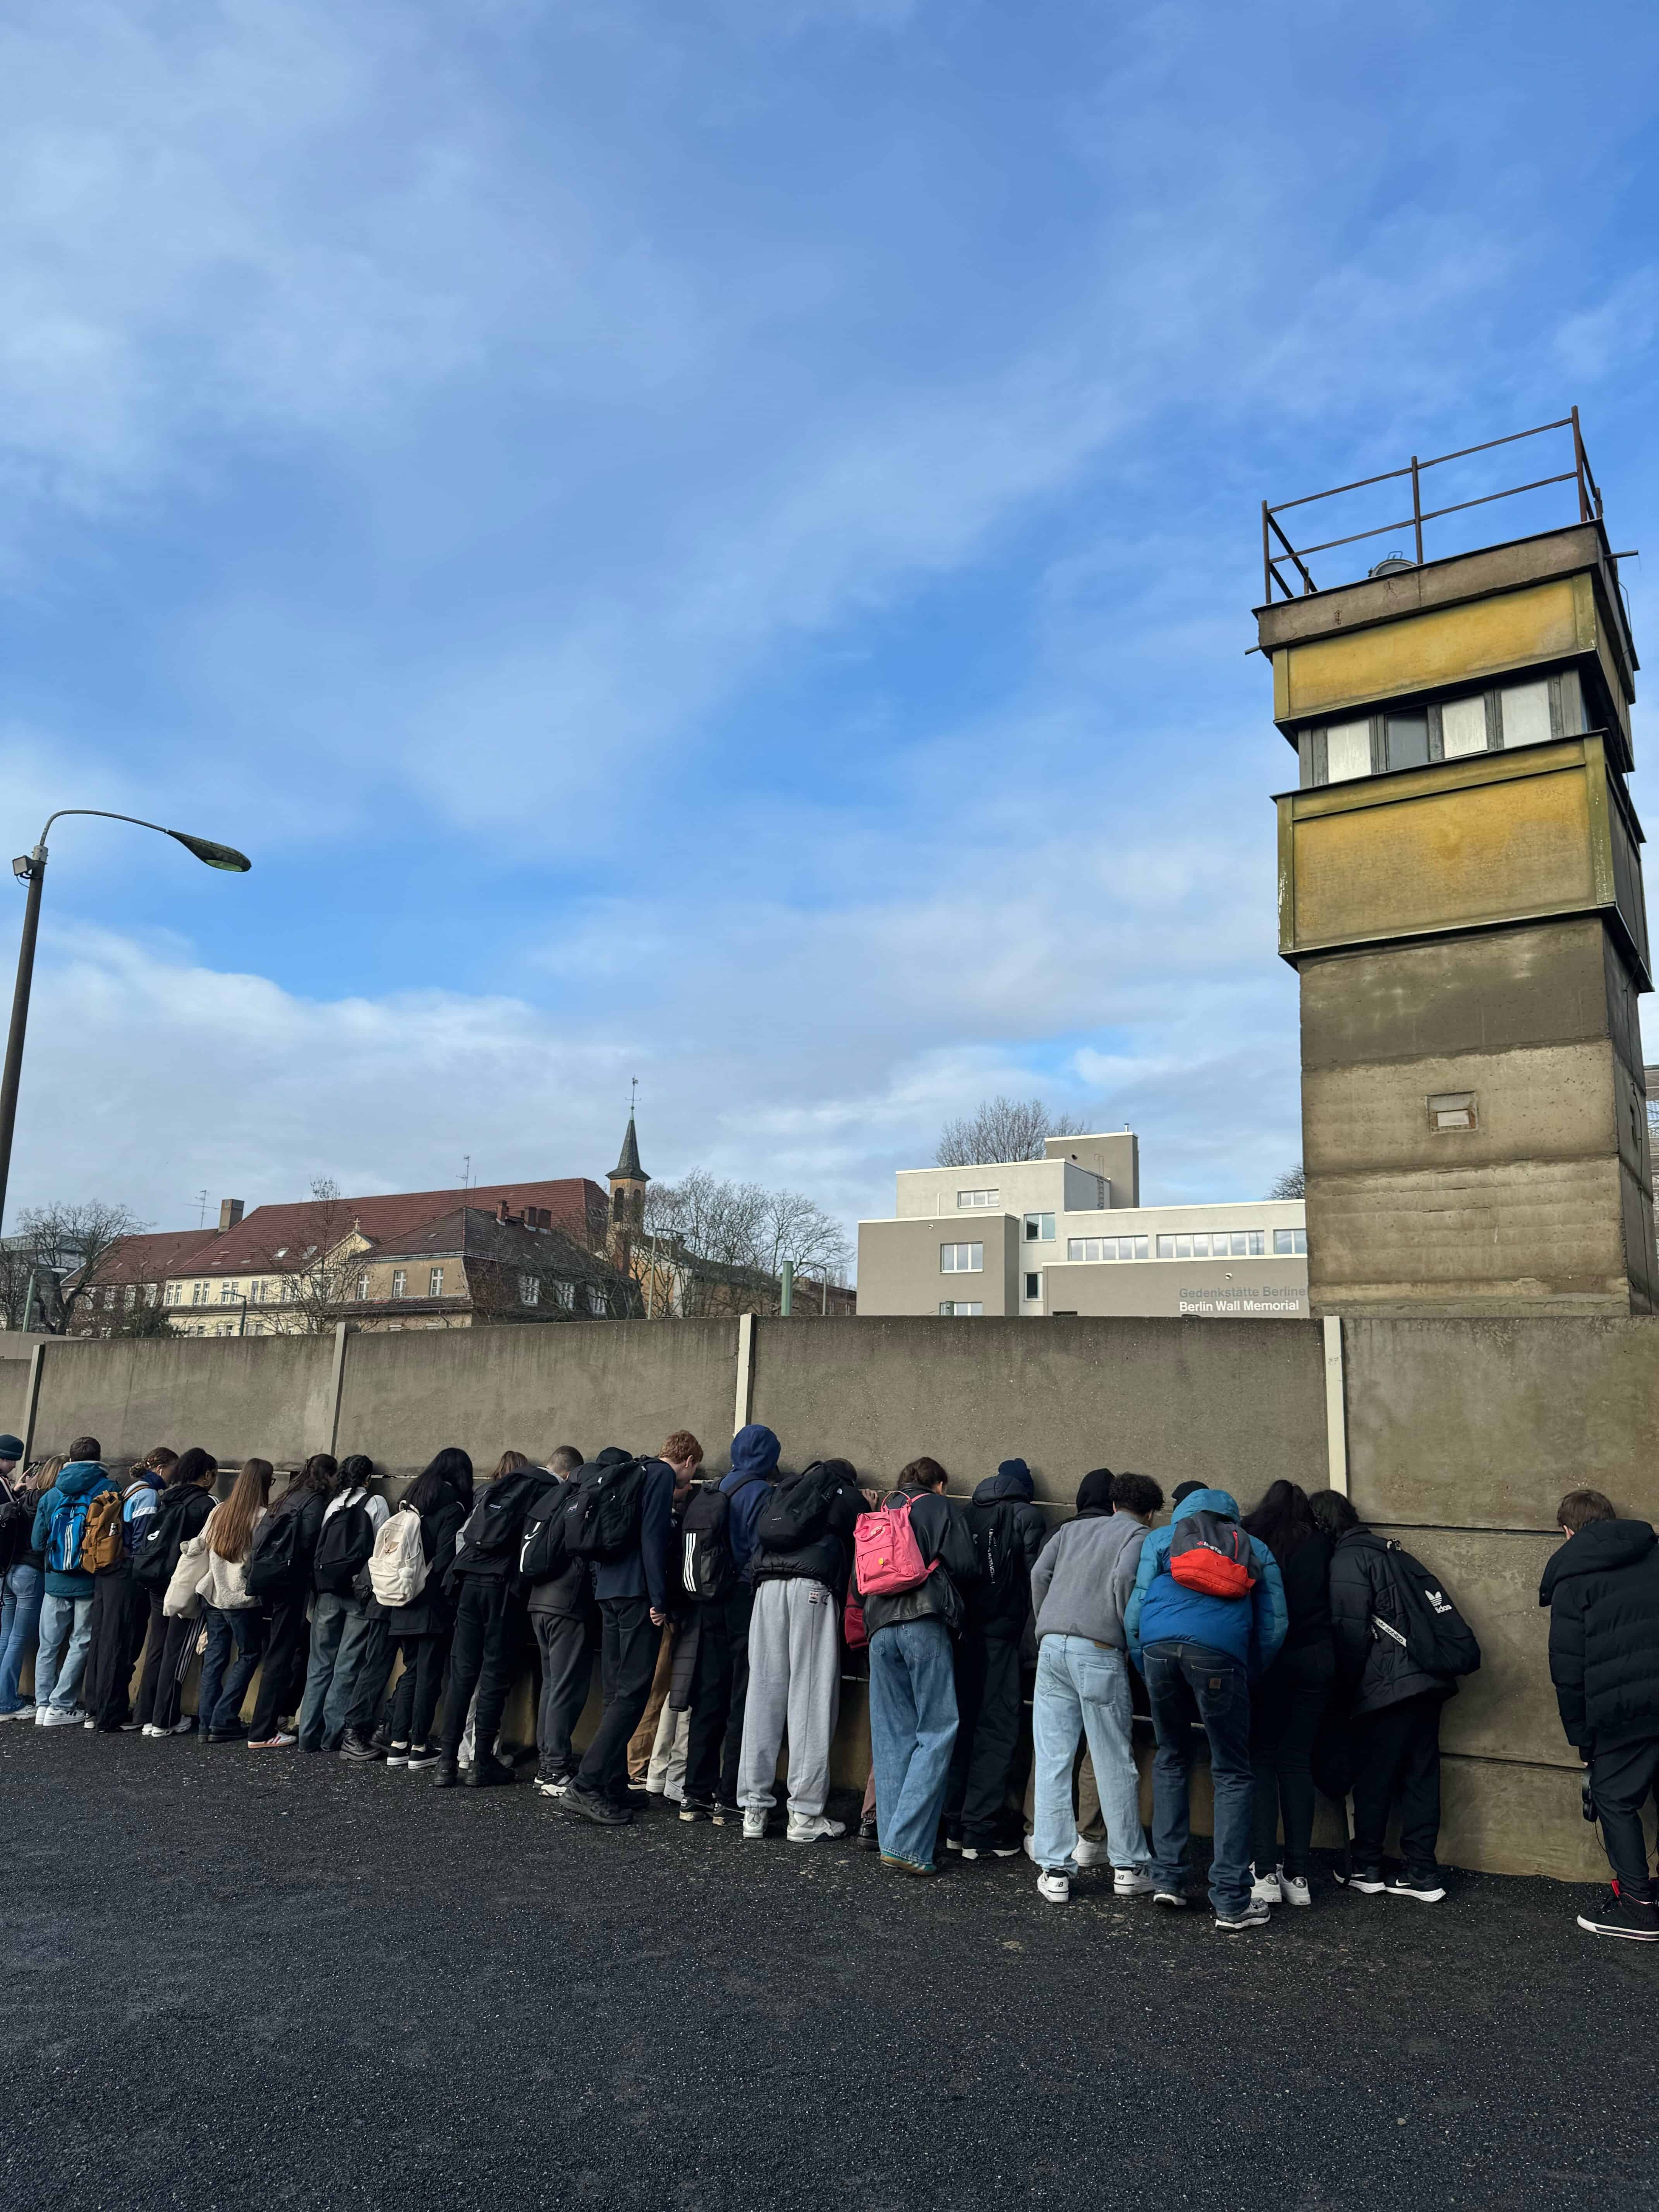 Students from Didsbury High School at the Berlin Wall memorial next to a watchtower